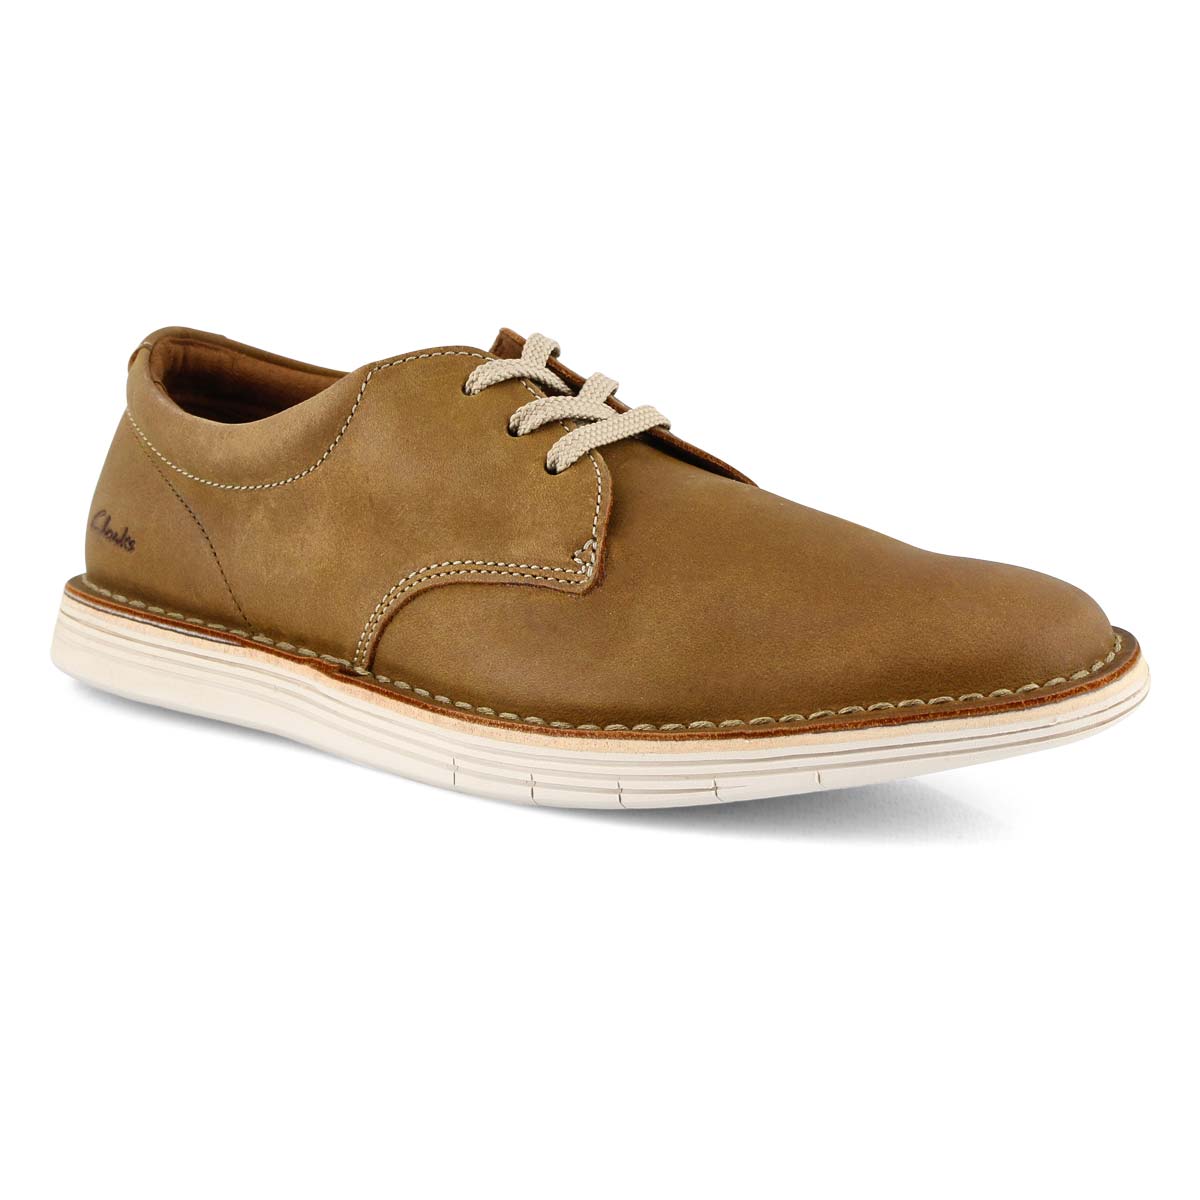 Clarks Men's Forge Vibe Casual Oxford - Tan | SoftMoc.com